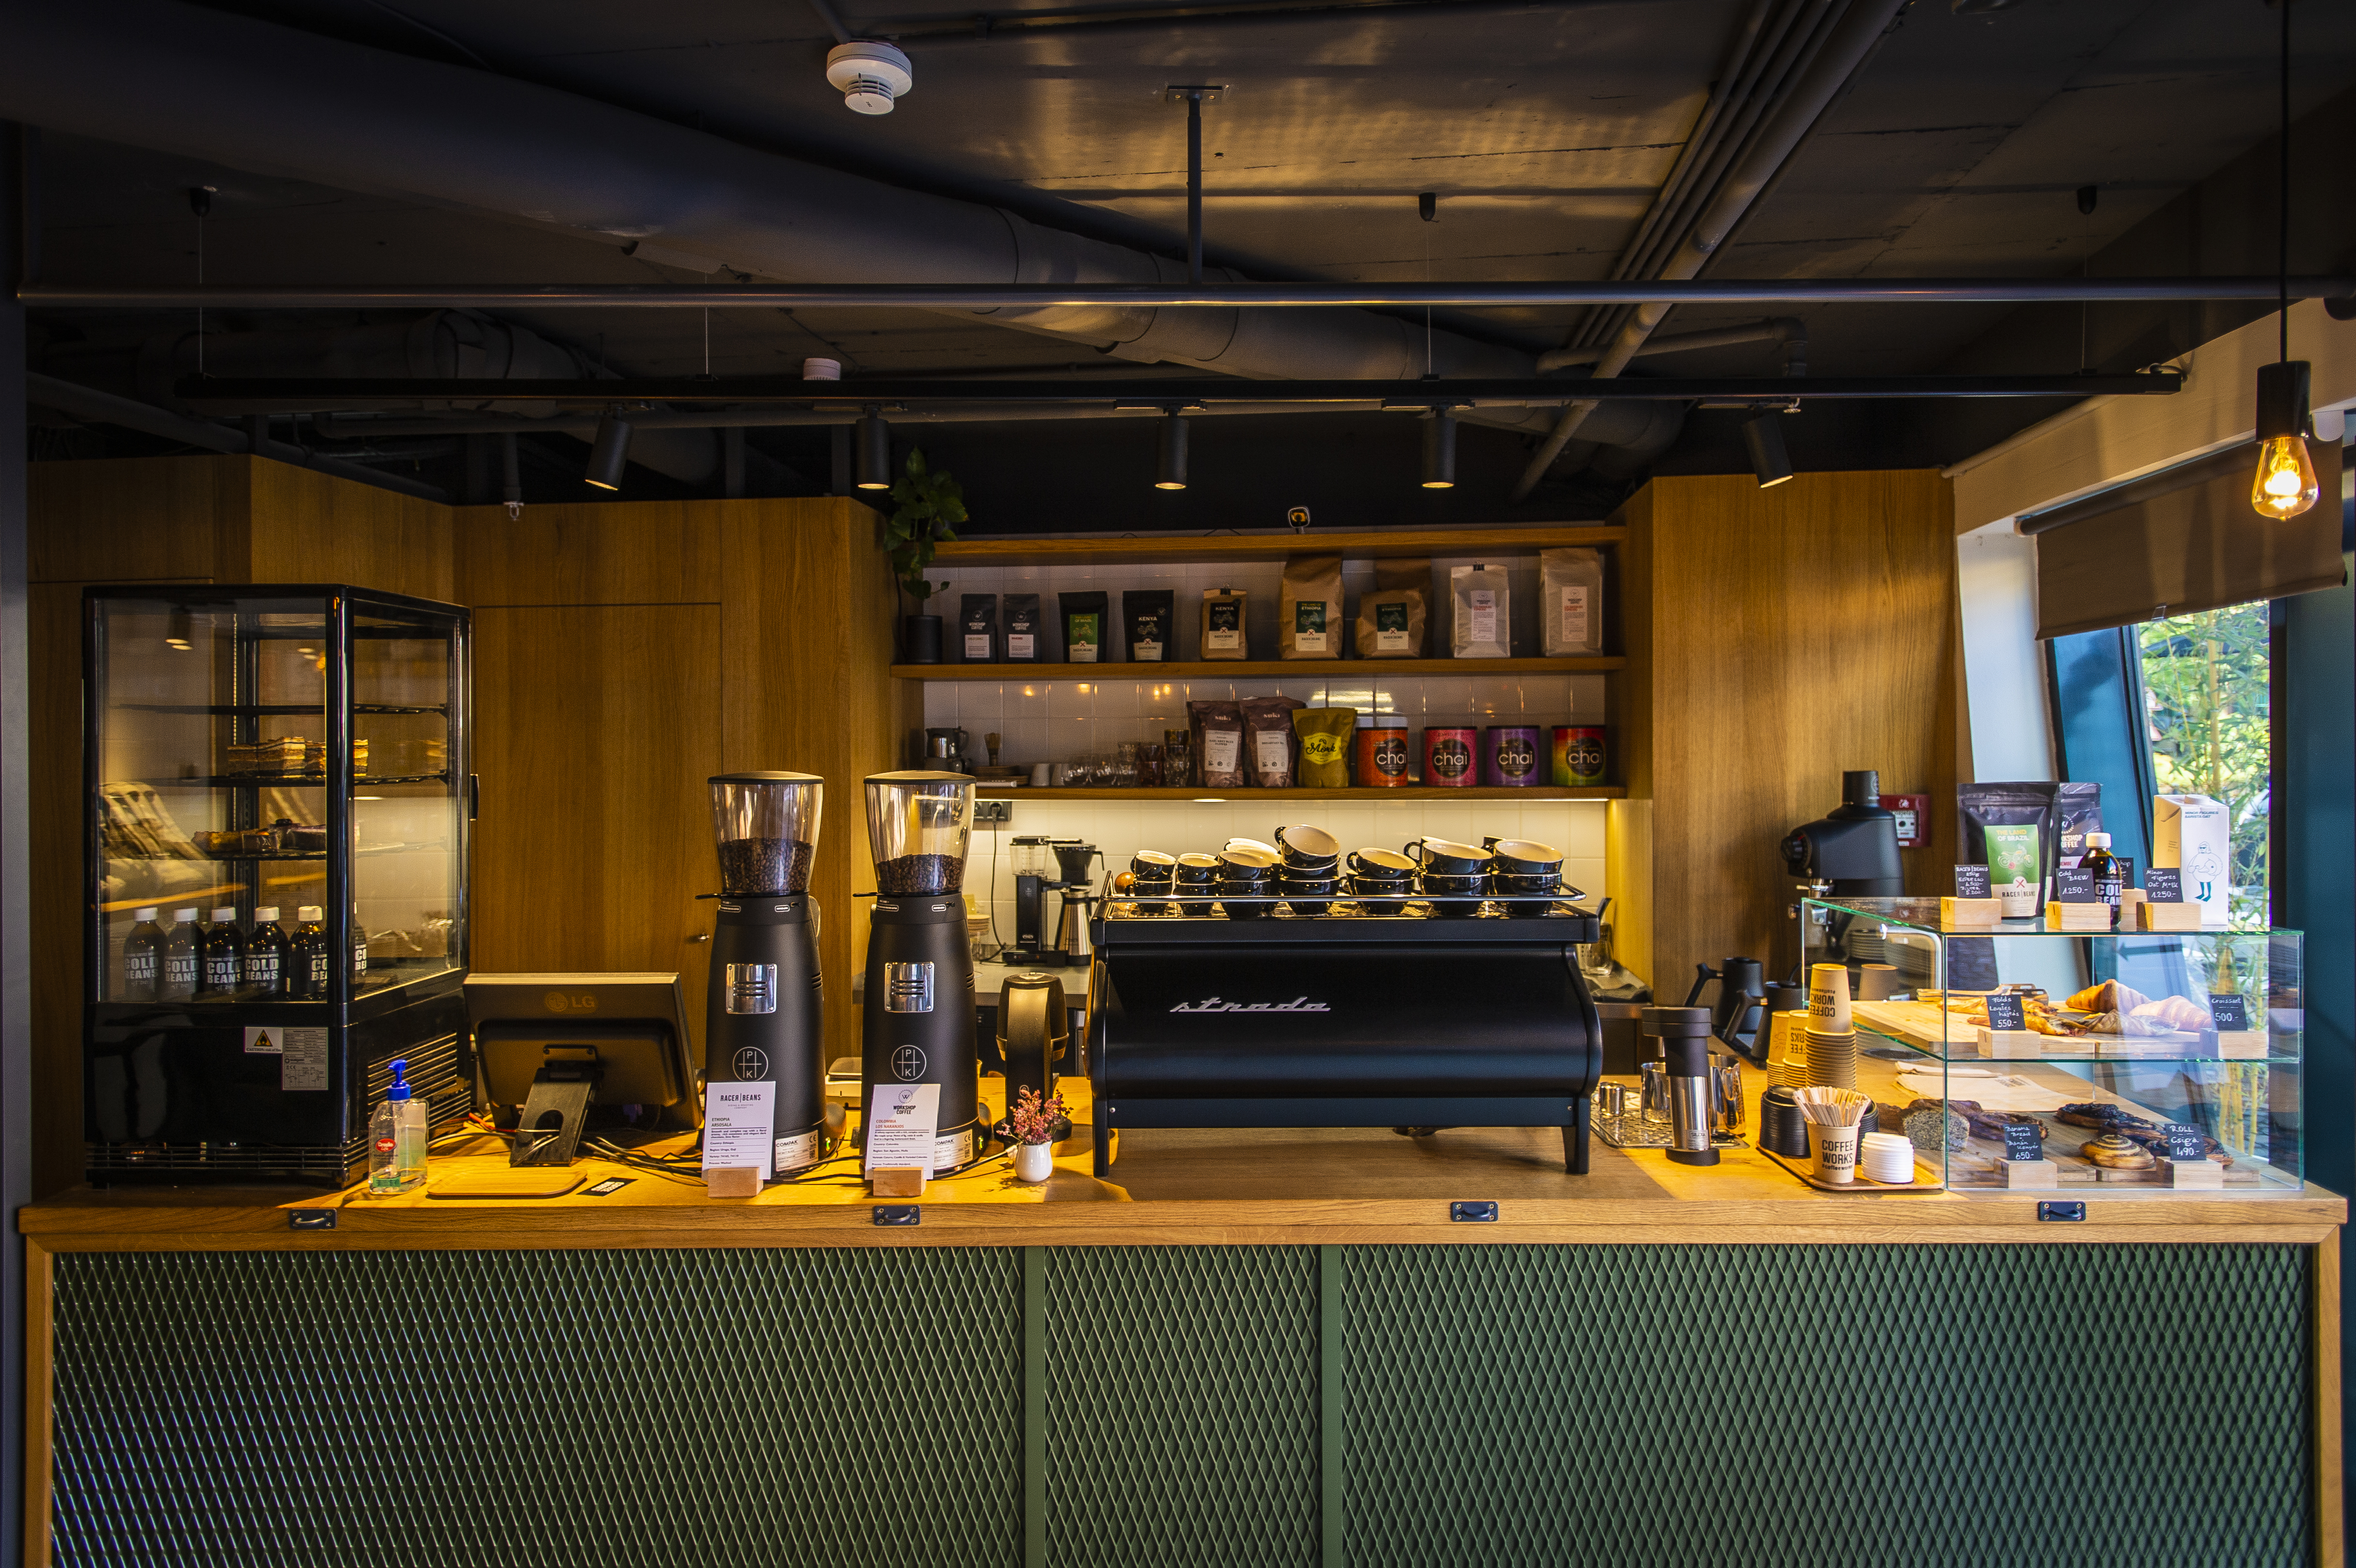 Where morning happiness comes from artistic machines – Coffee Works offers cold and hot brews